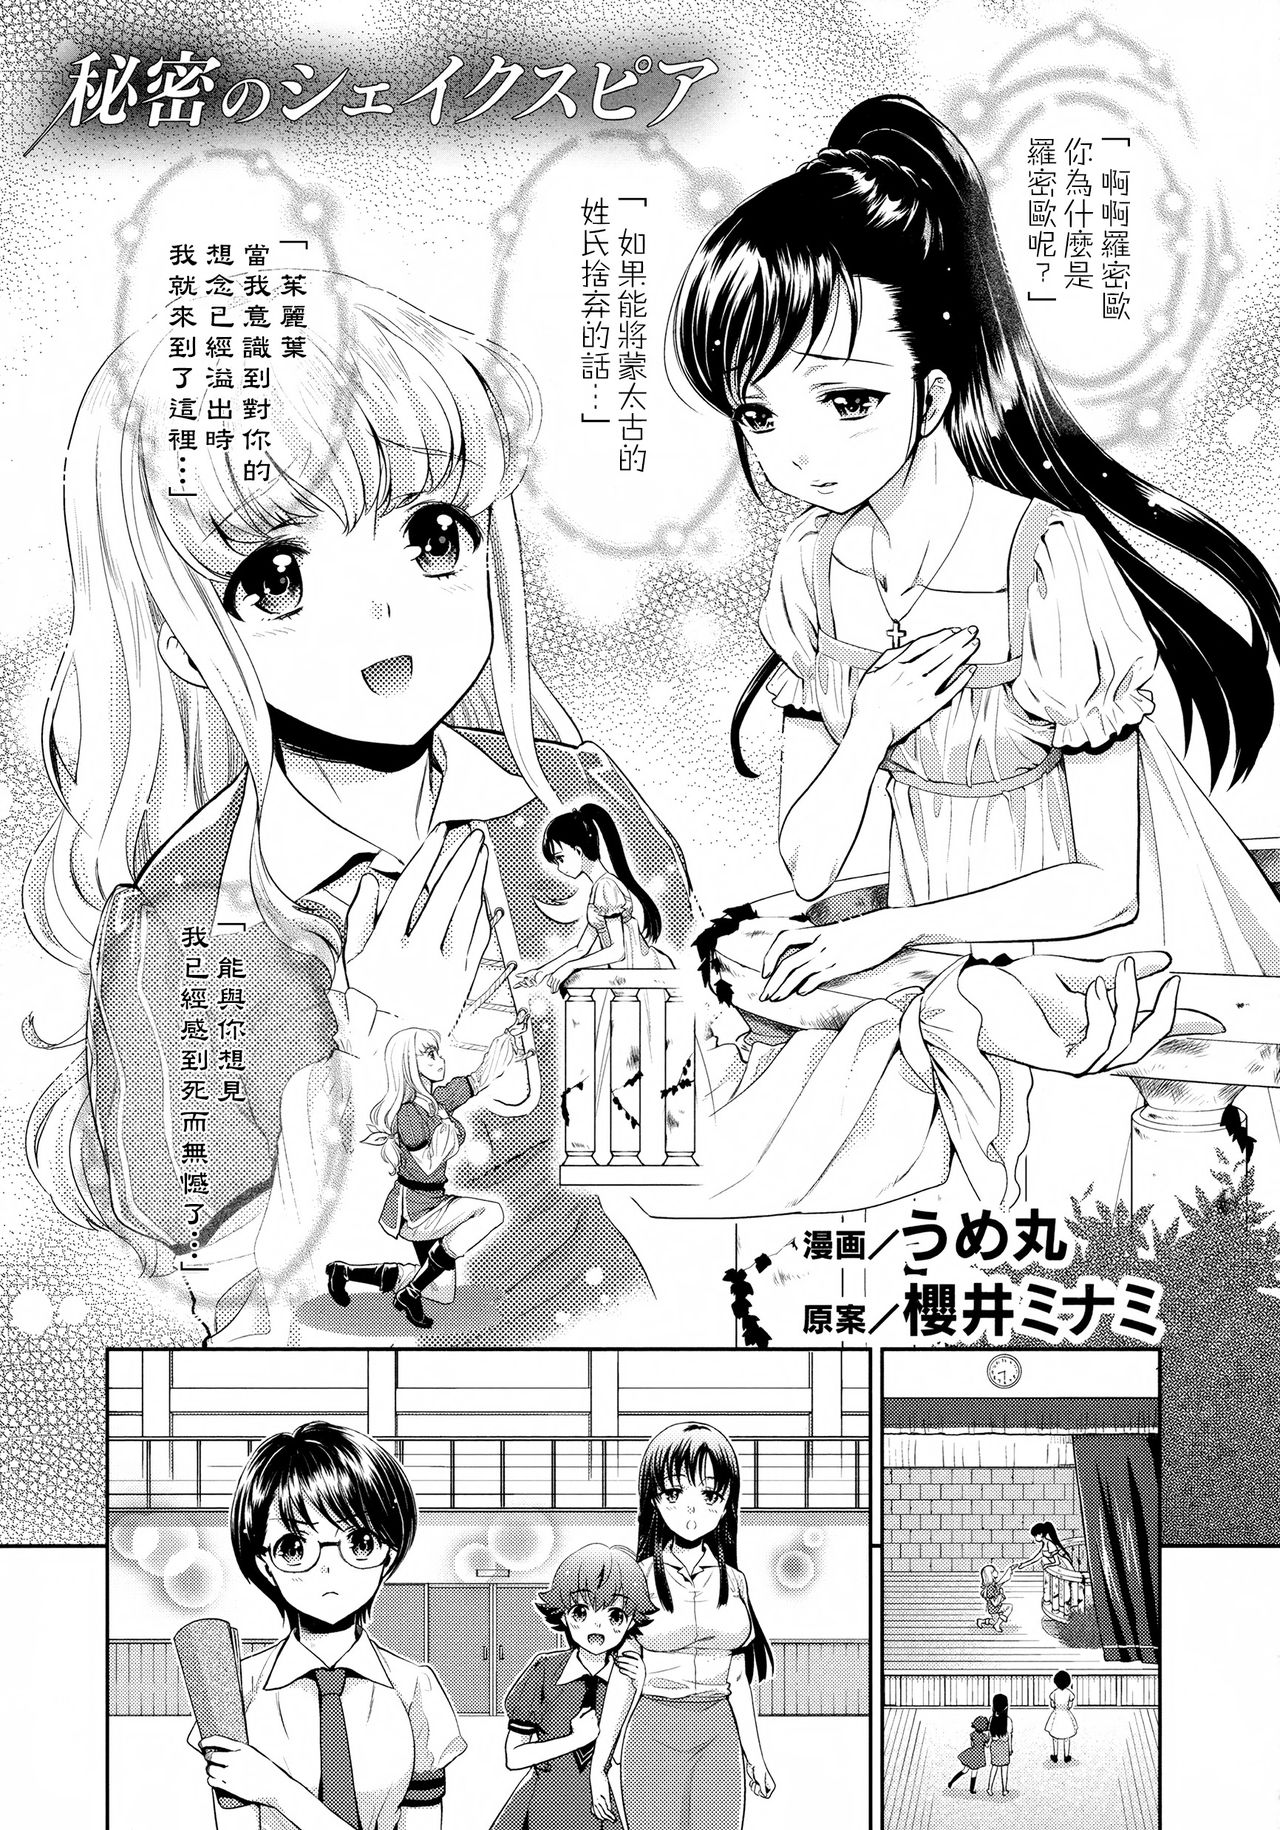 [Anthology] Ao Yuri -Story Of Club Activities- [Chinese] [无毒汉化组] [Incomplete] [アンソロジー] 青百合 -Story Of Club Activities- [中文翻譯] [ページ欠落]